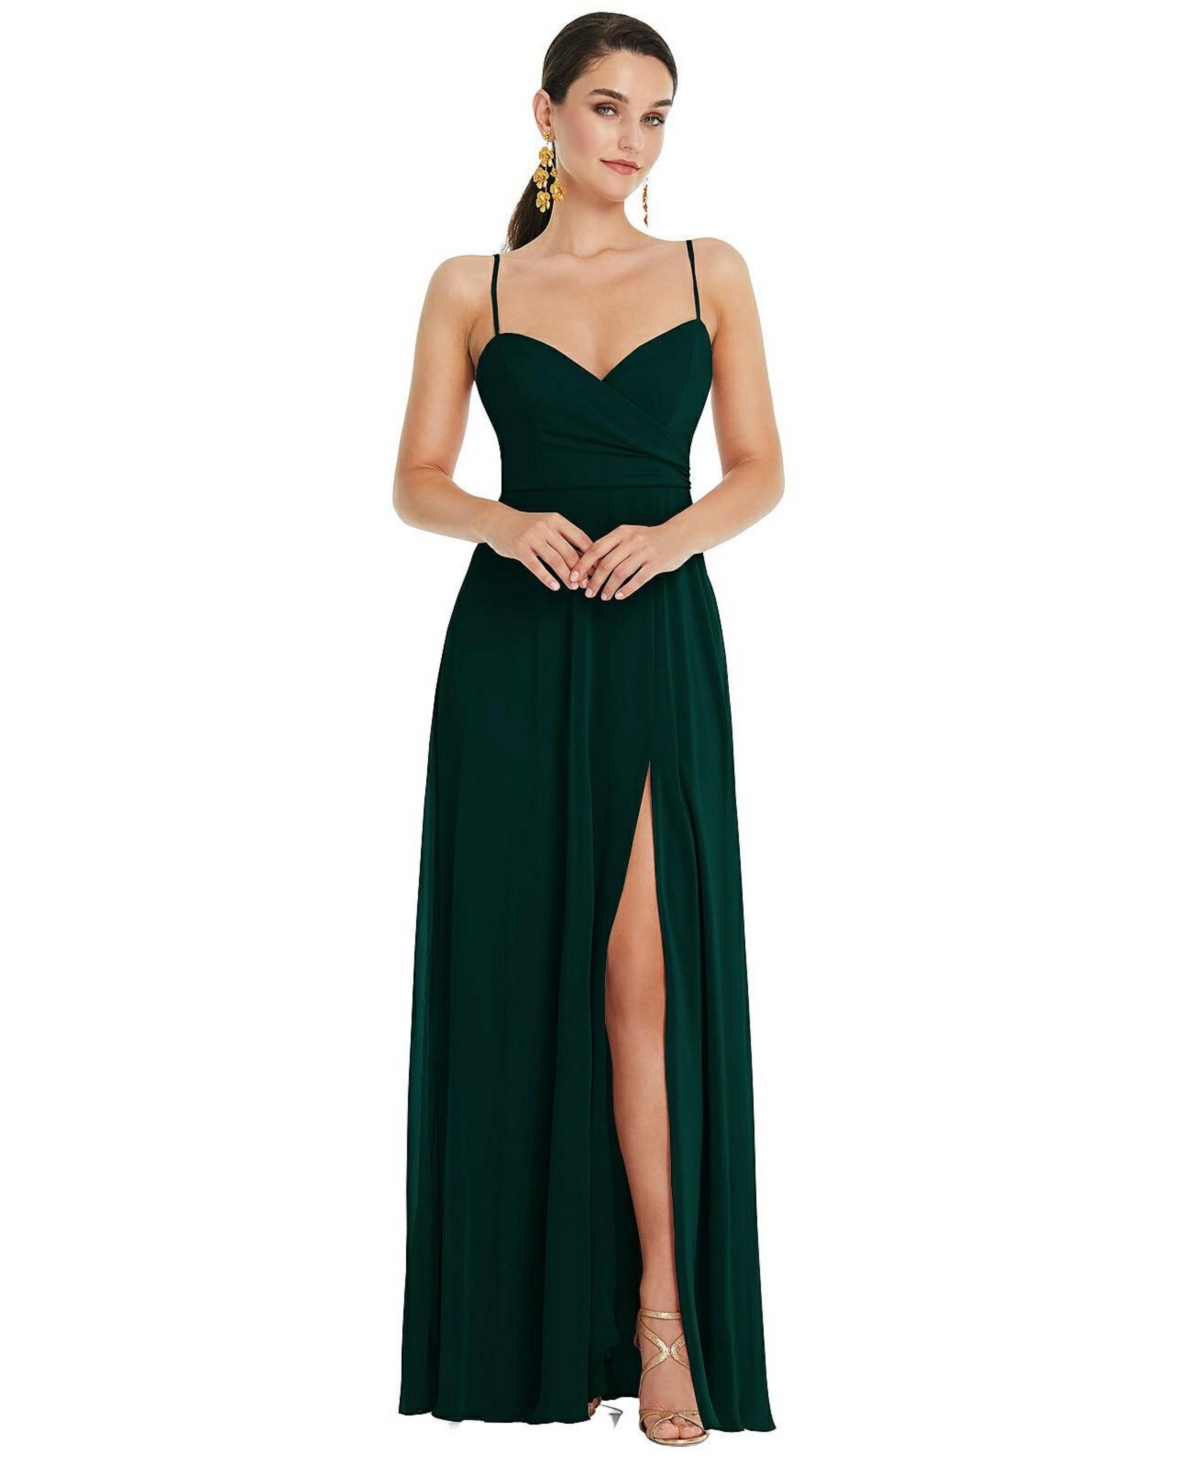 LOVELY WOMENS ADJUSTABLE STRAP WRAP BODICE MAXI DRESS WITH FRONT SLIT